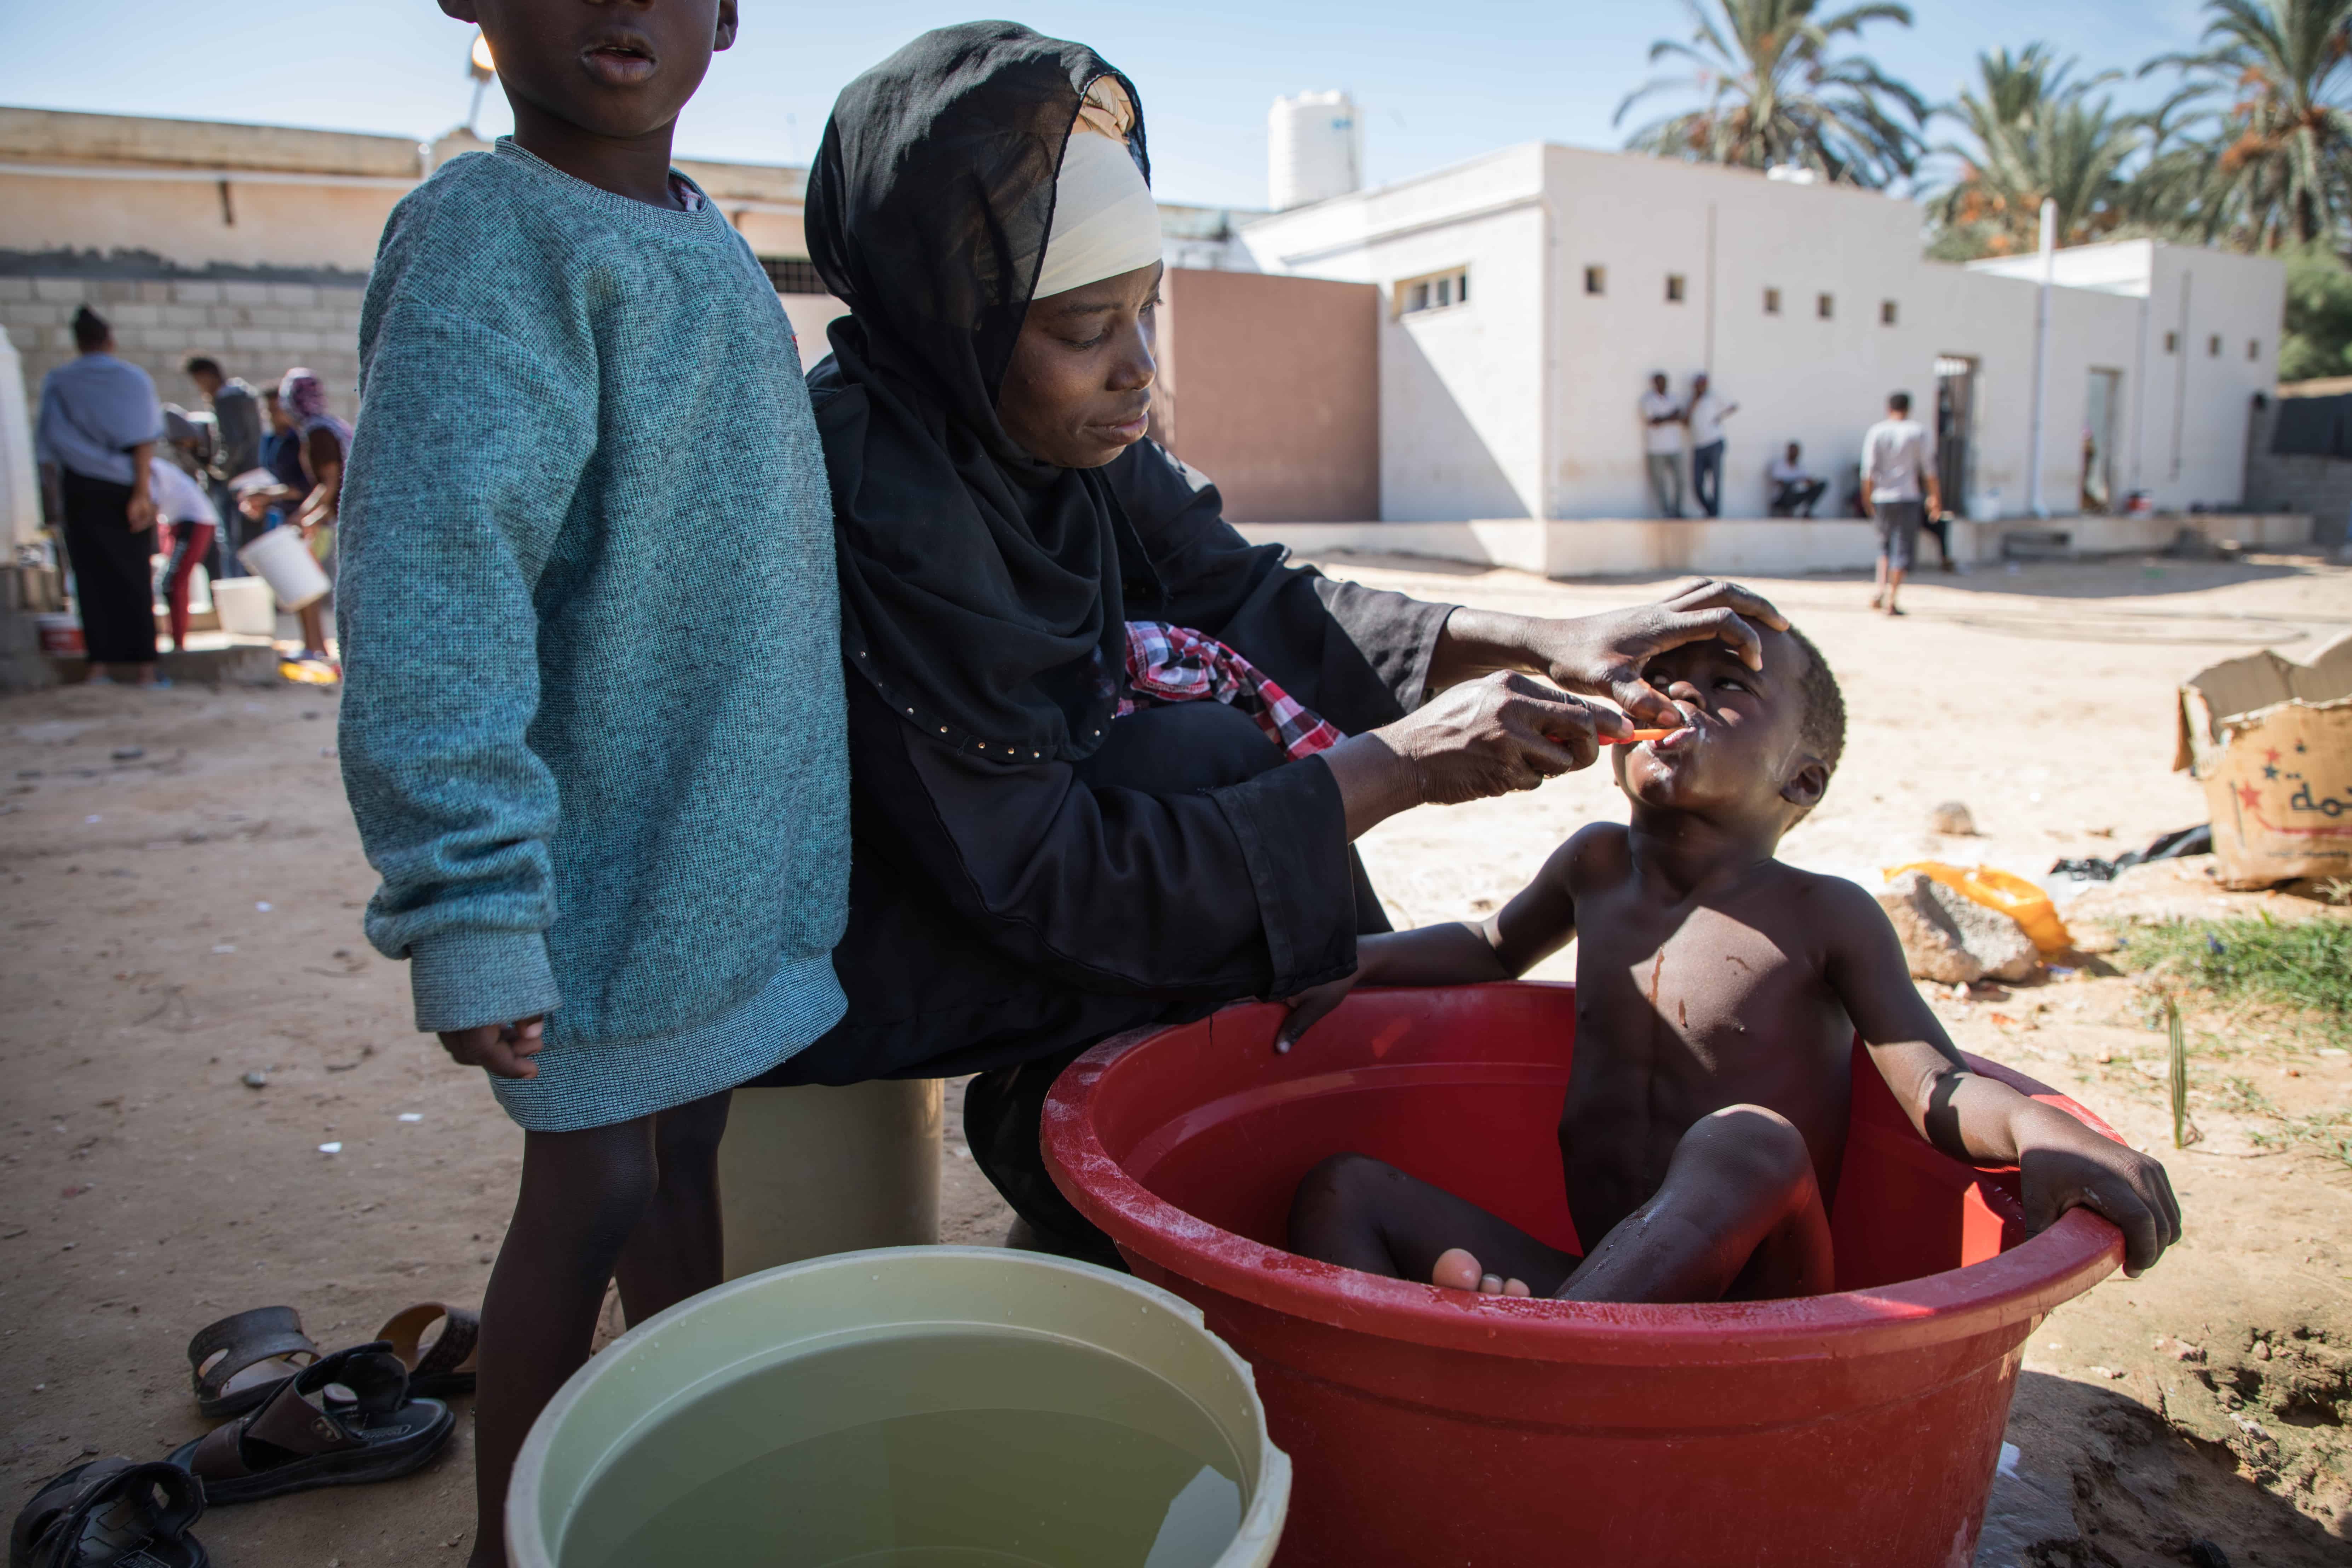 A mother brushes her child's teeth while giving him a bath within the confines of the Souq Al-Khamis detention centre. Khoms, Libya, October 2019.
© AURELIE BAUMEL/MSF